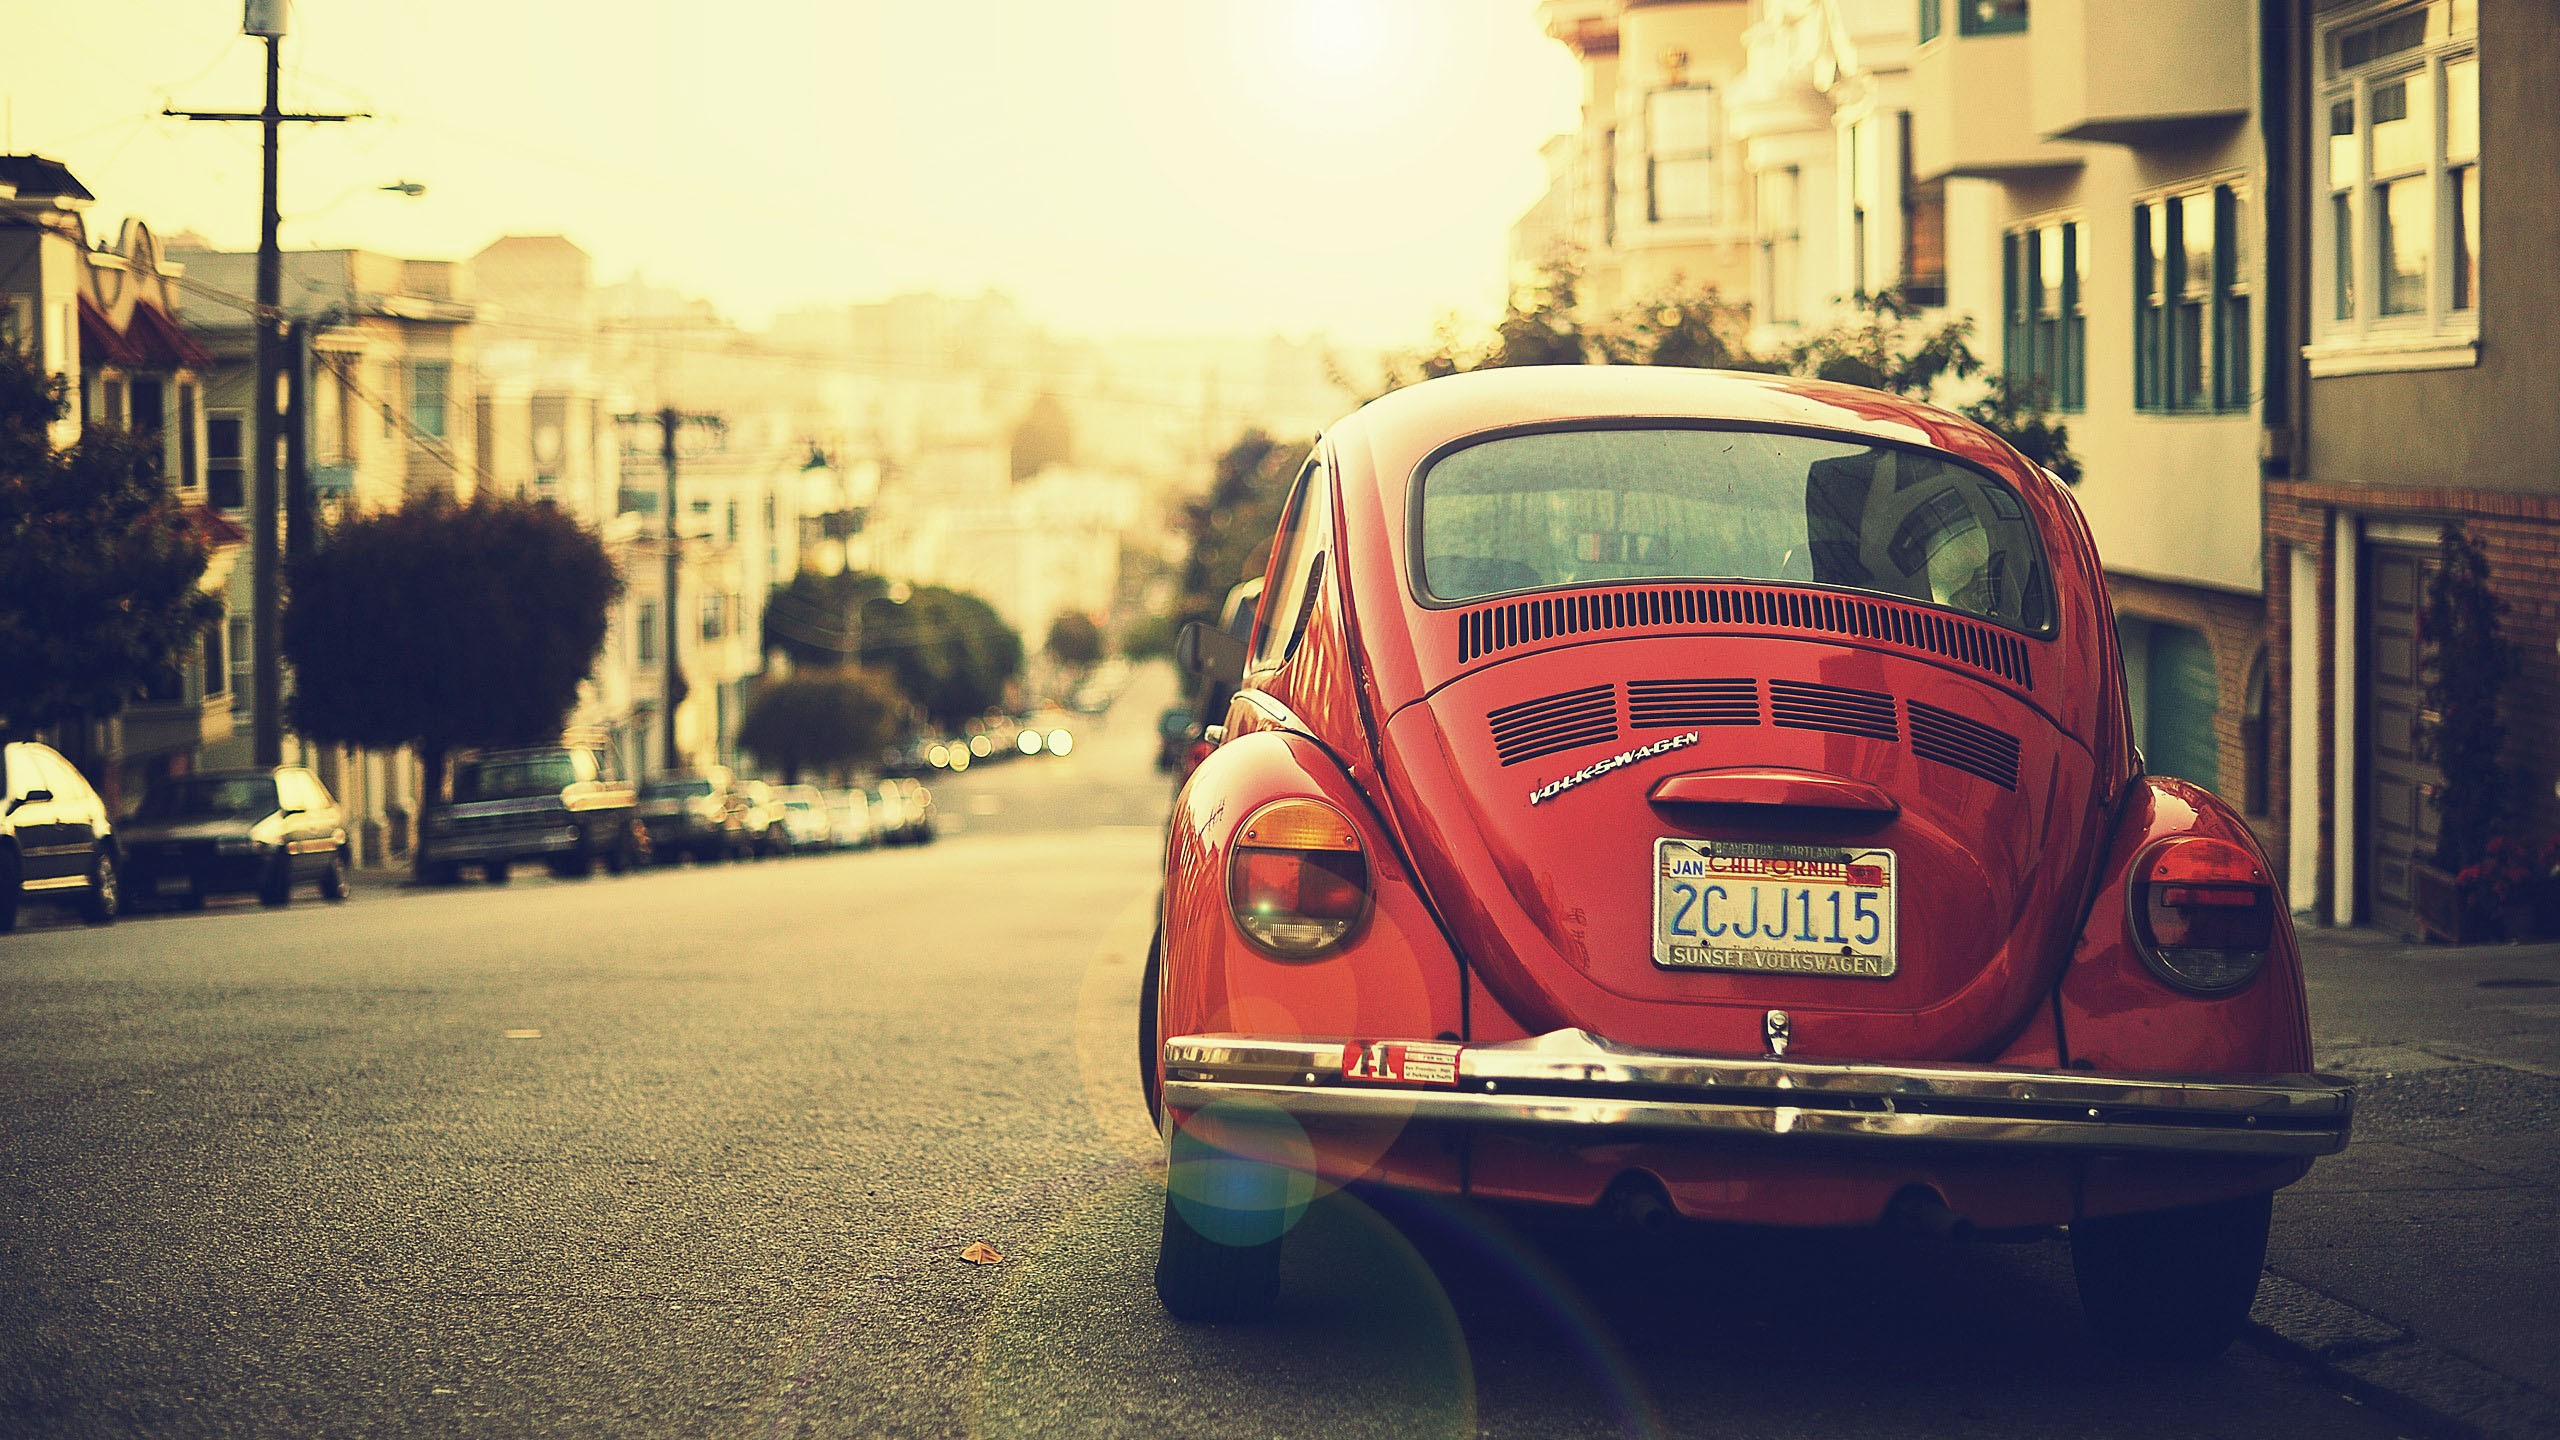 Volkswagen Beetle Vintage Photography HD Wallpaper Is a Awesome HD